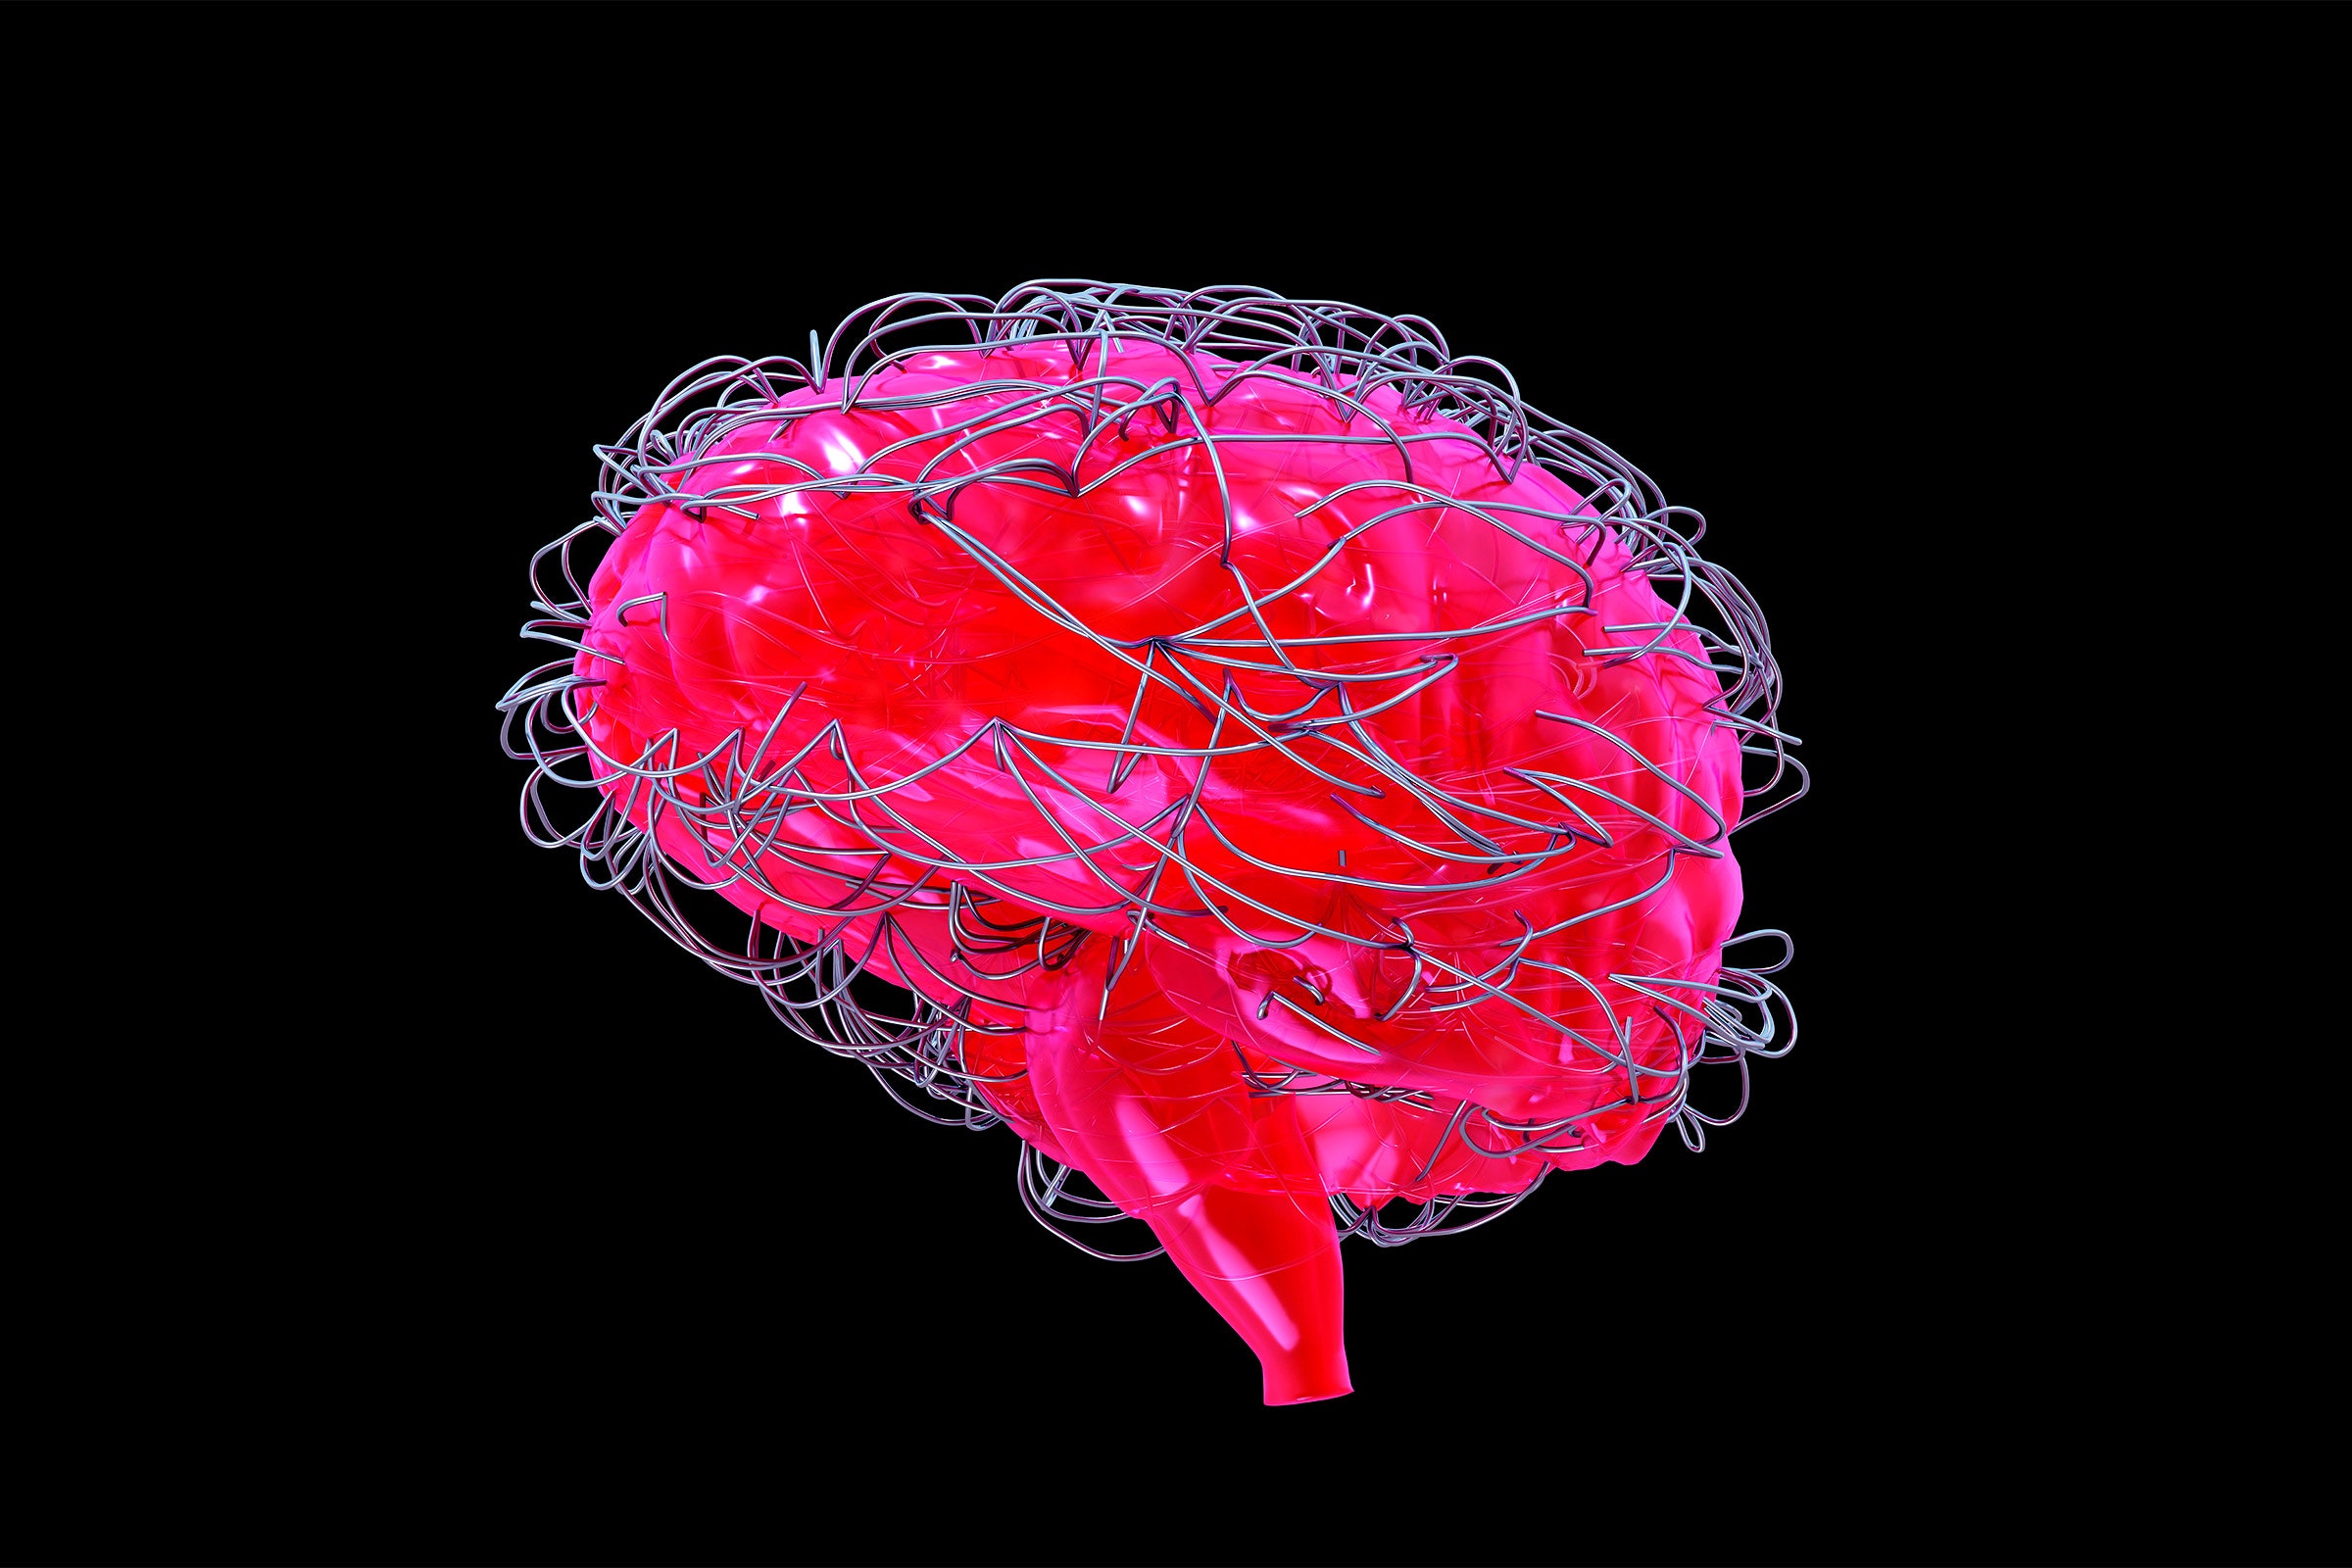 Digital rendering of a brain with wires coming out of it